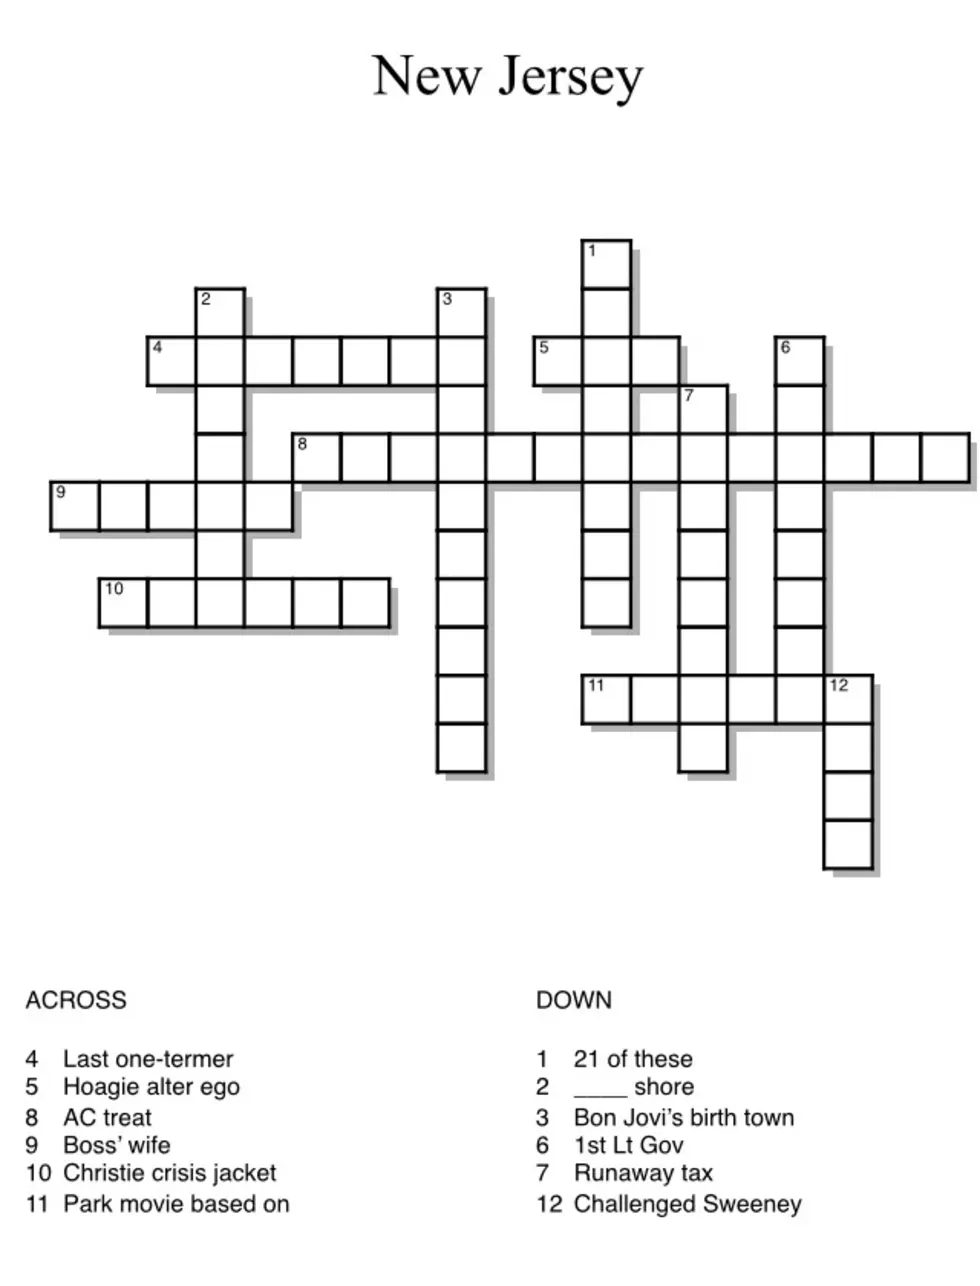 The all-Jersey crossword puzzle answers